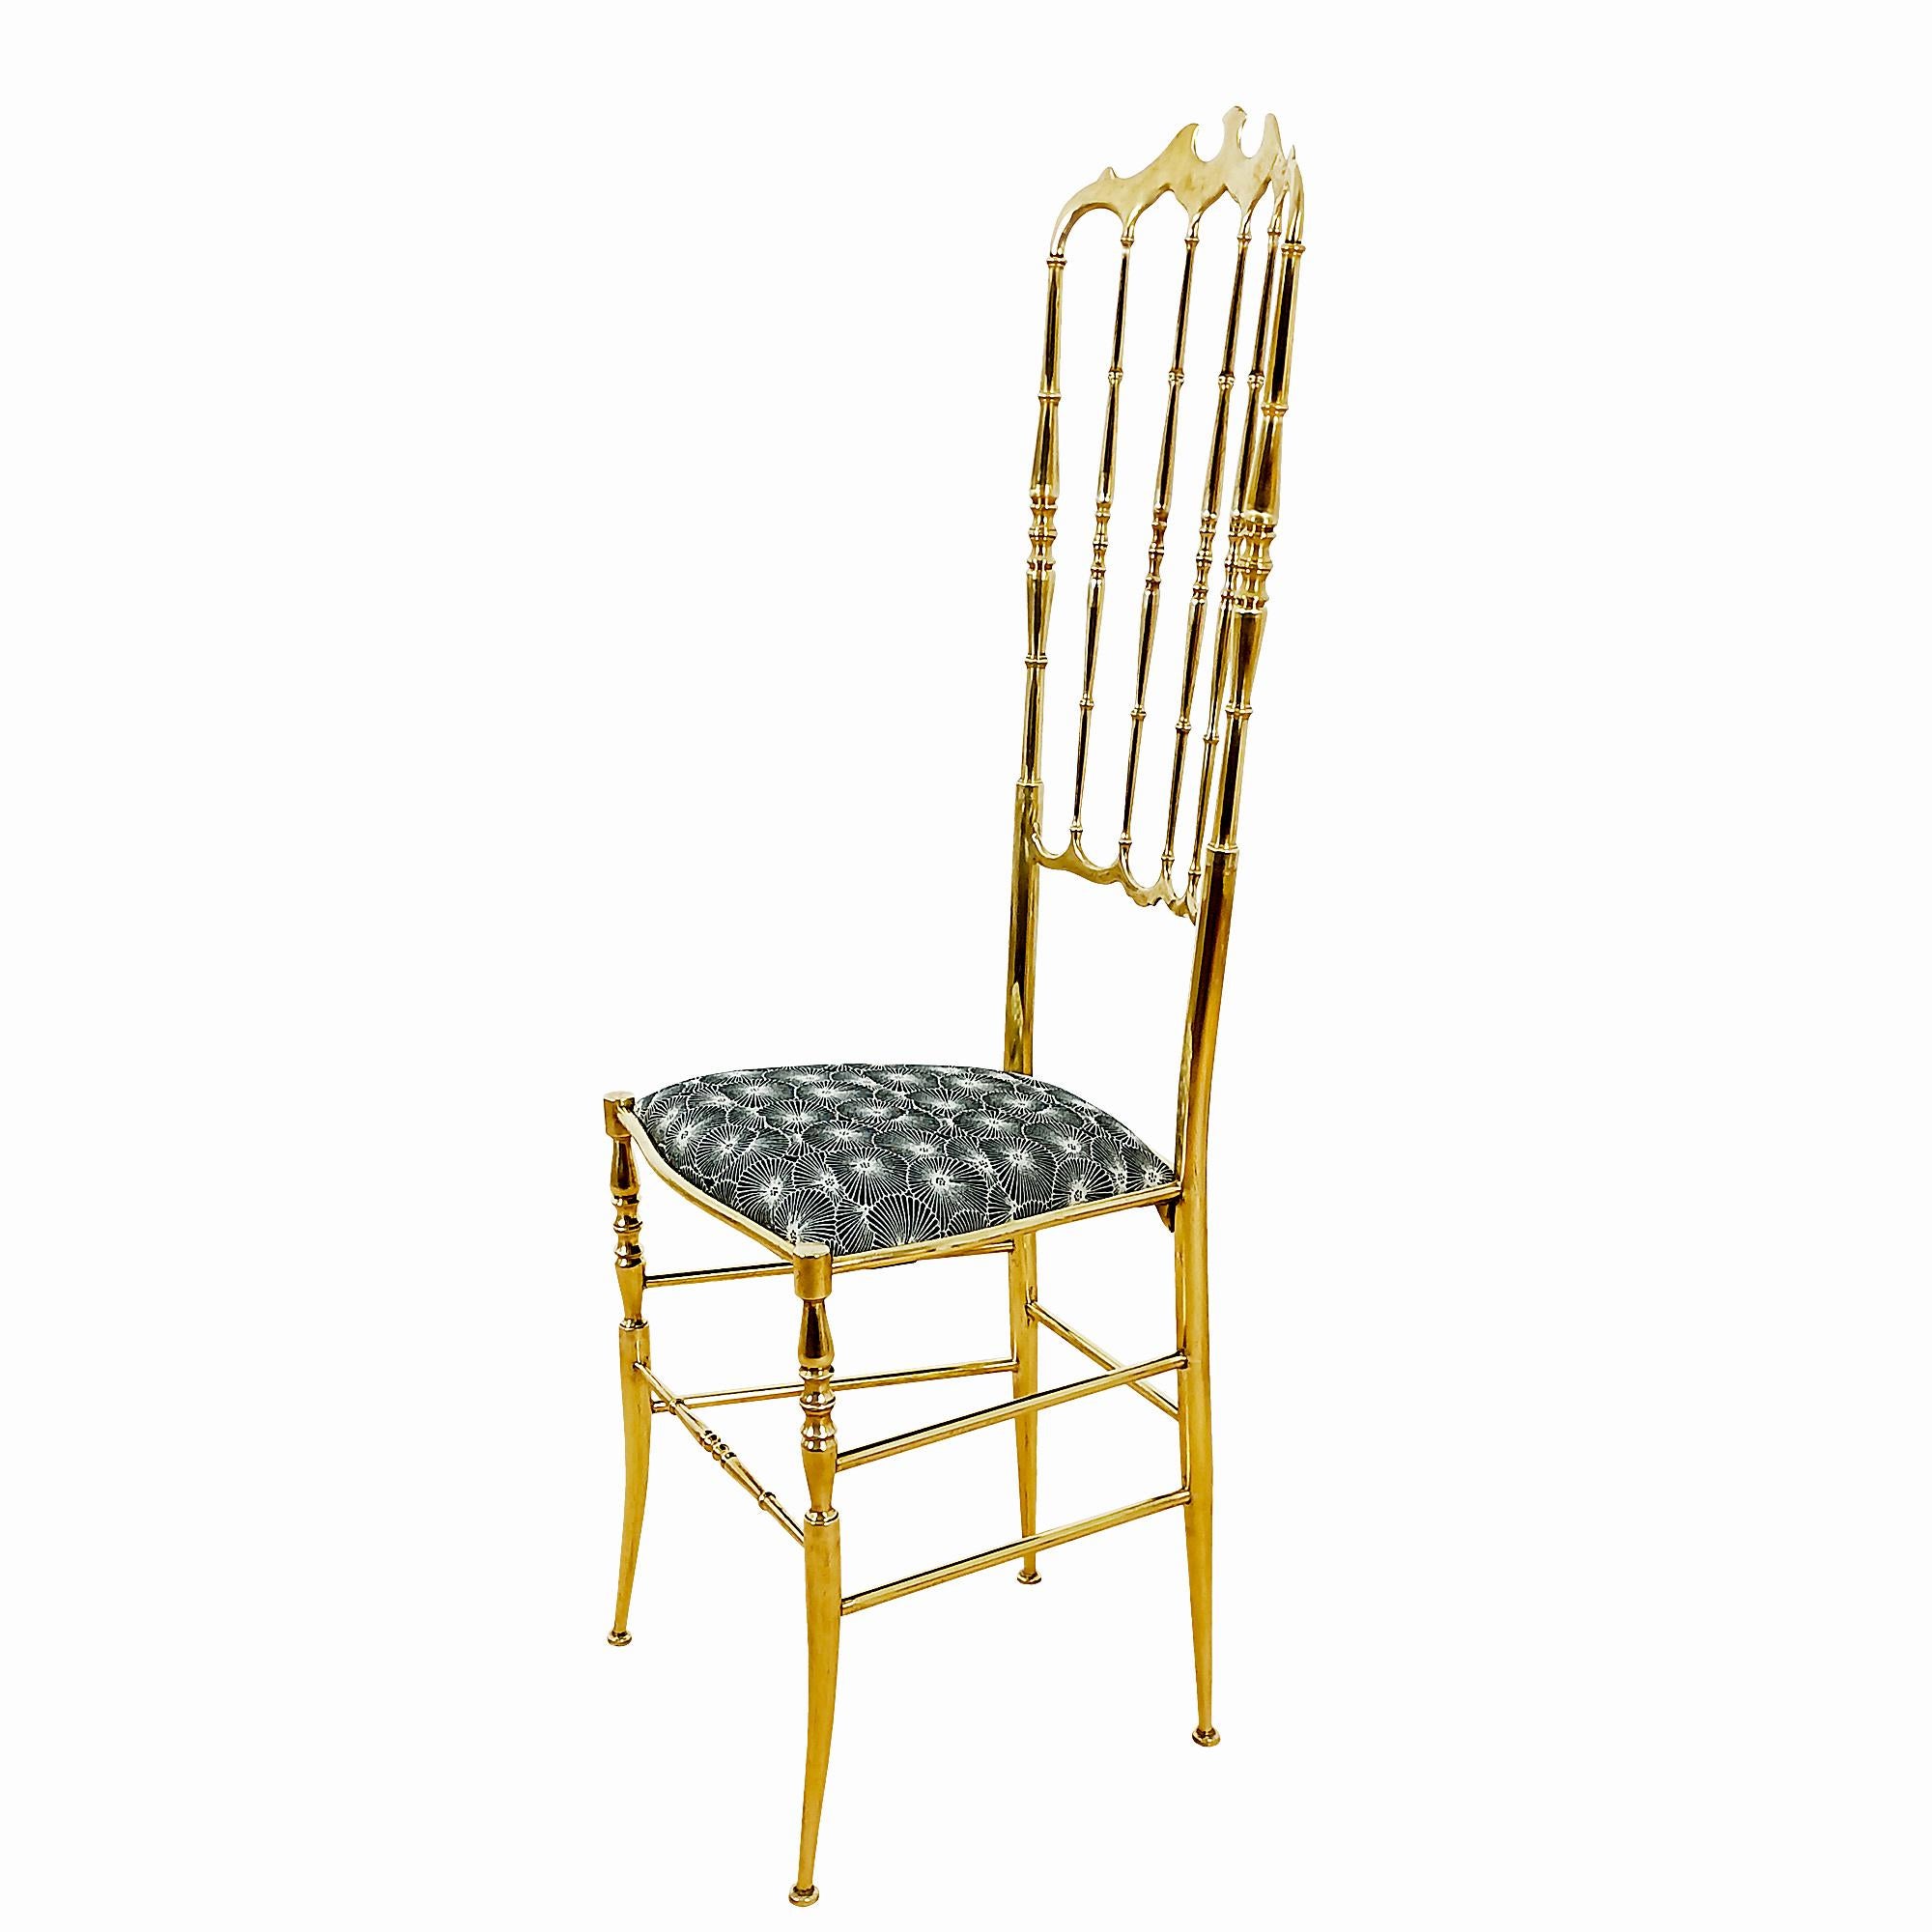 Polished Pair of Mid-Century Modern Chiavari Chairs with Japanese Fabric, Italy, 1940 For Sale